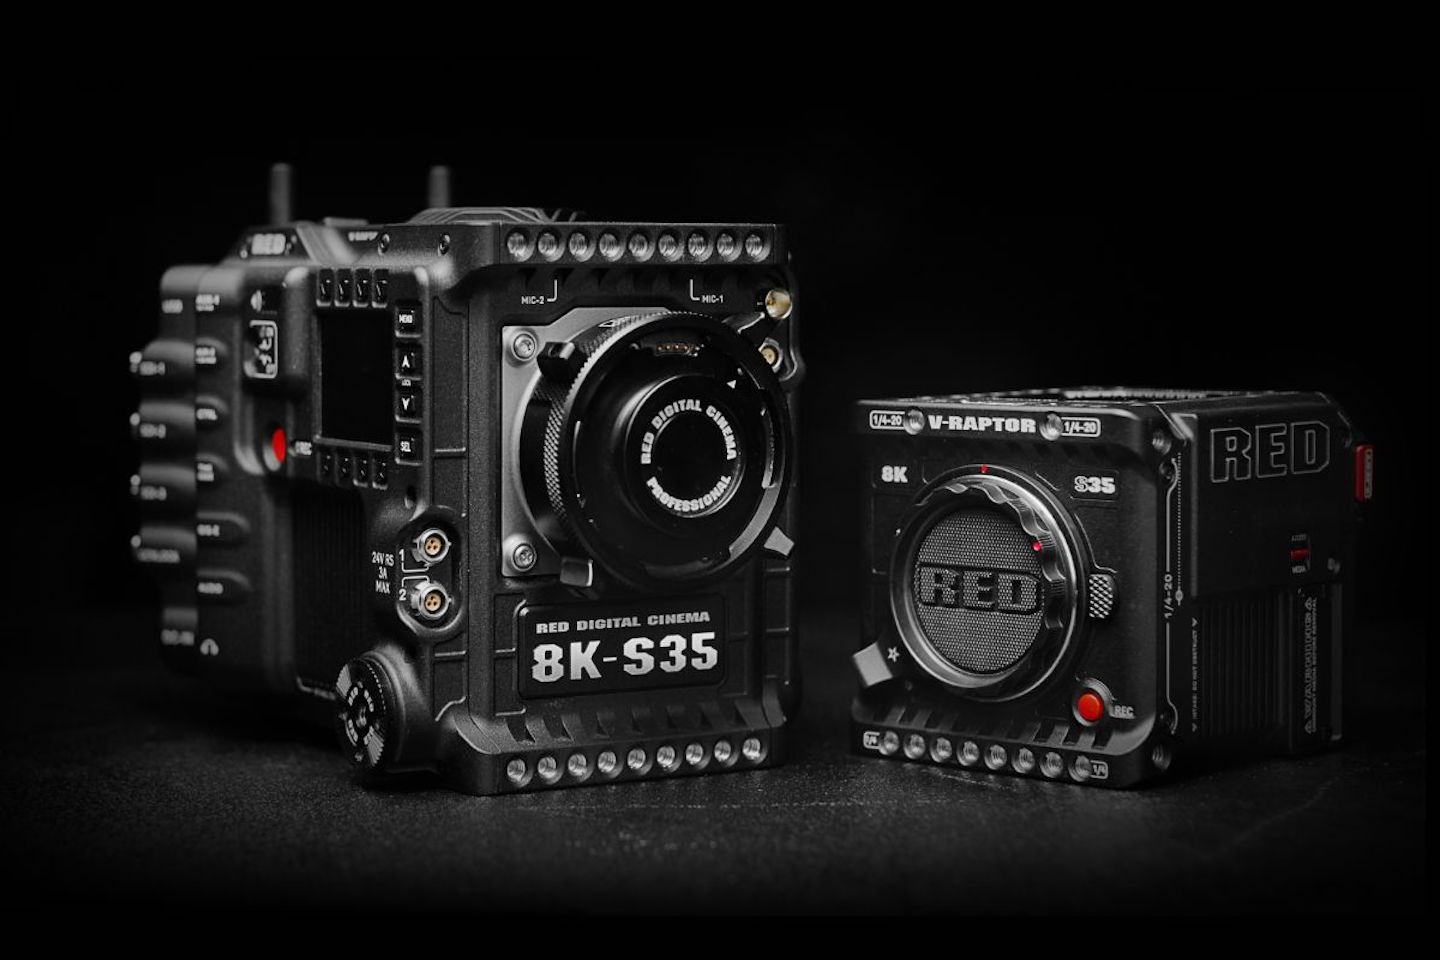 RED Digital Cinema launches Super35 version of V-Raptor and (...)